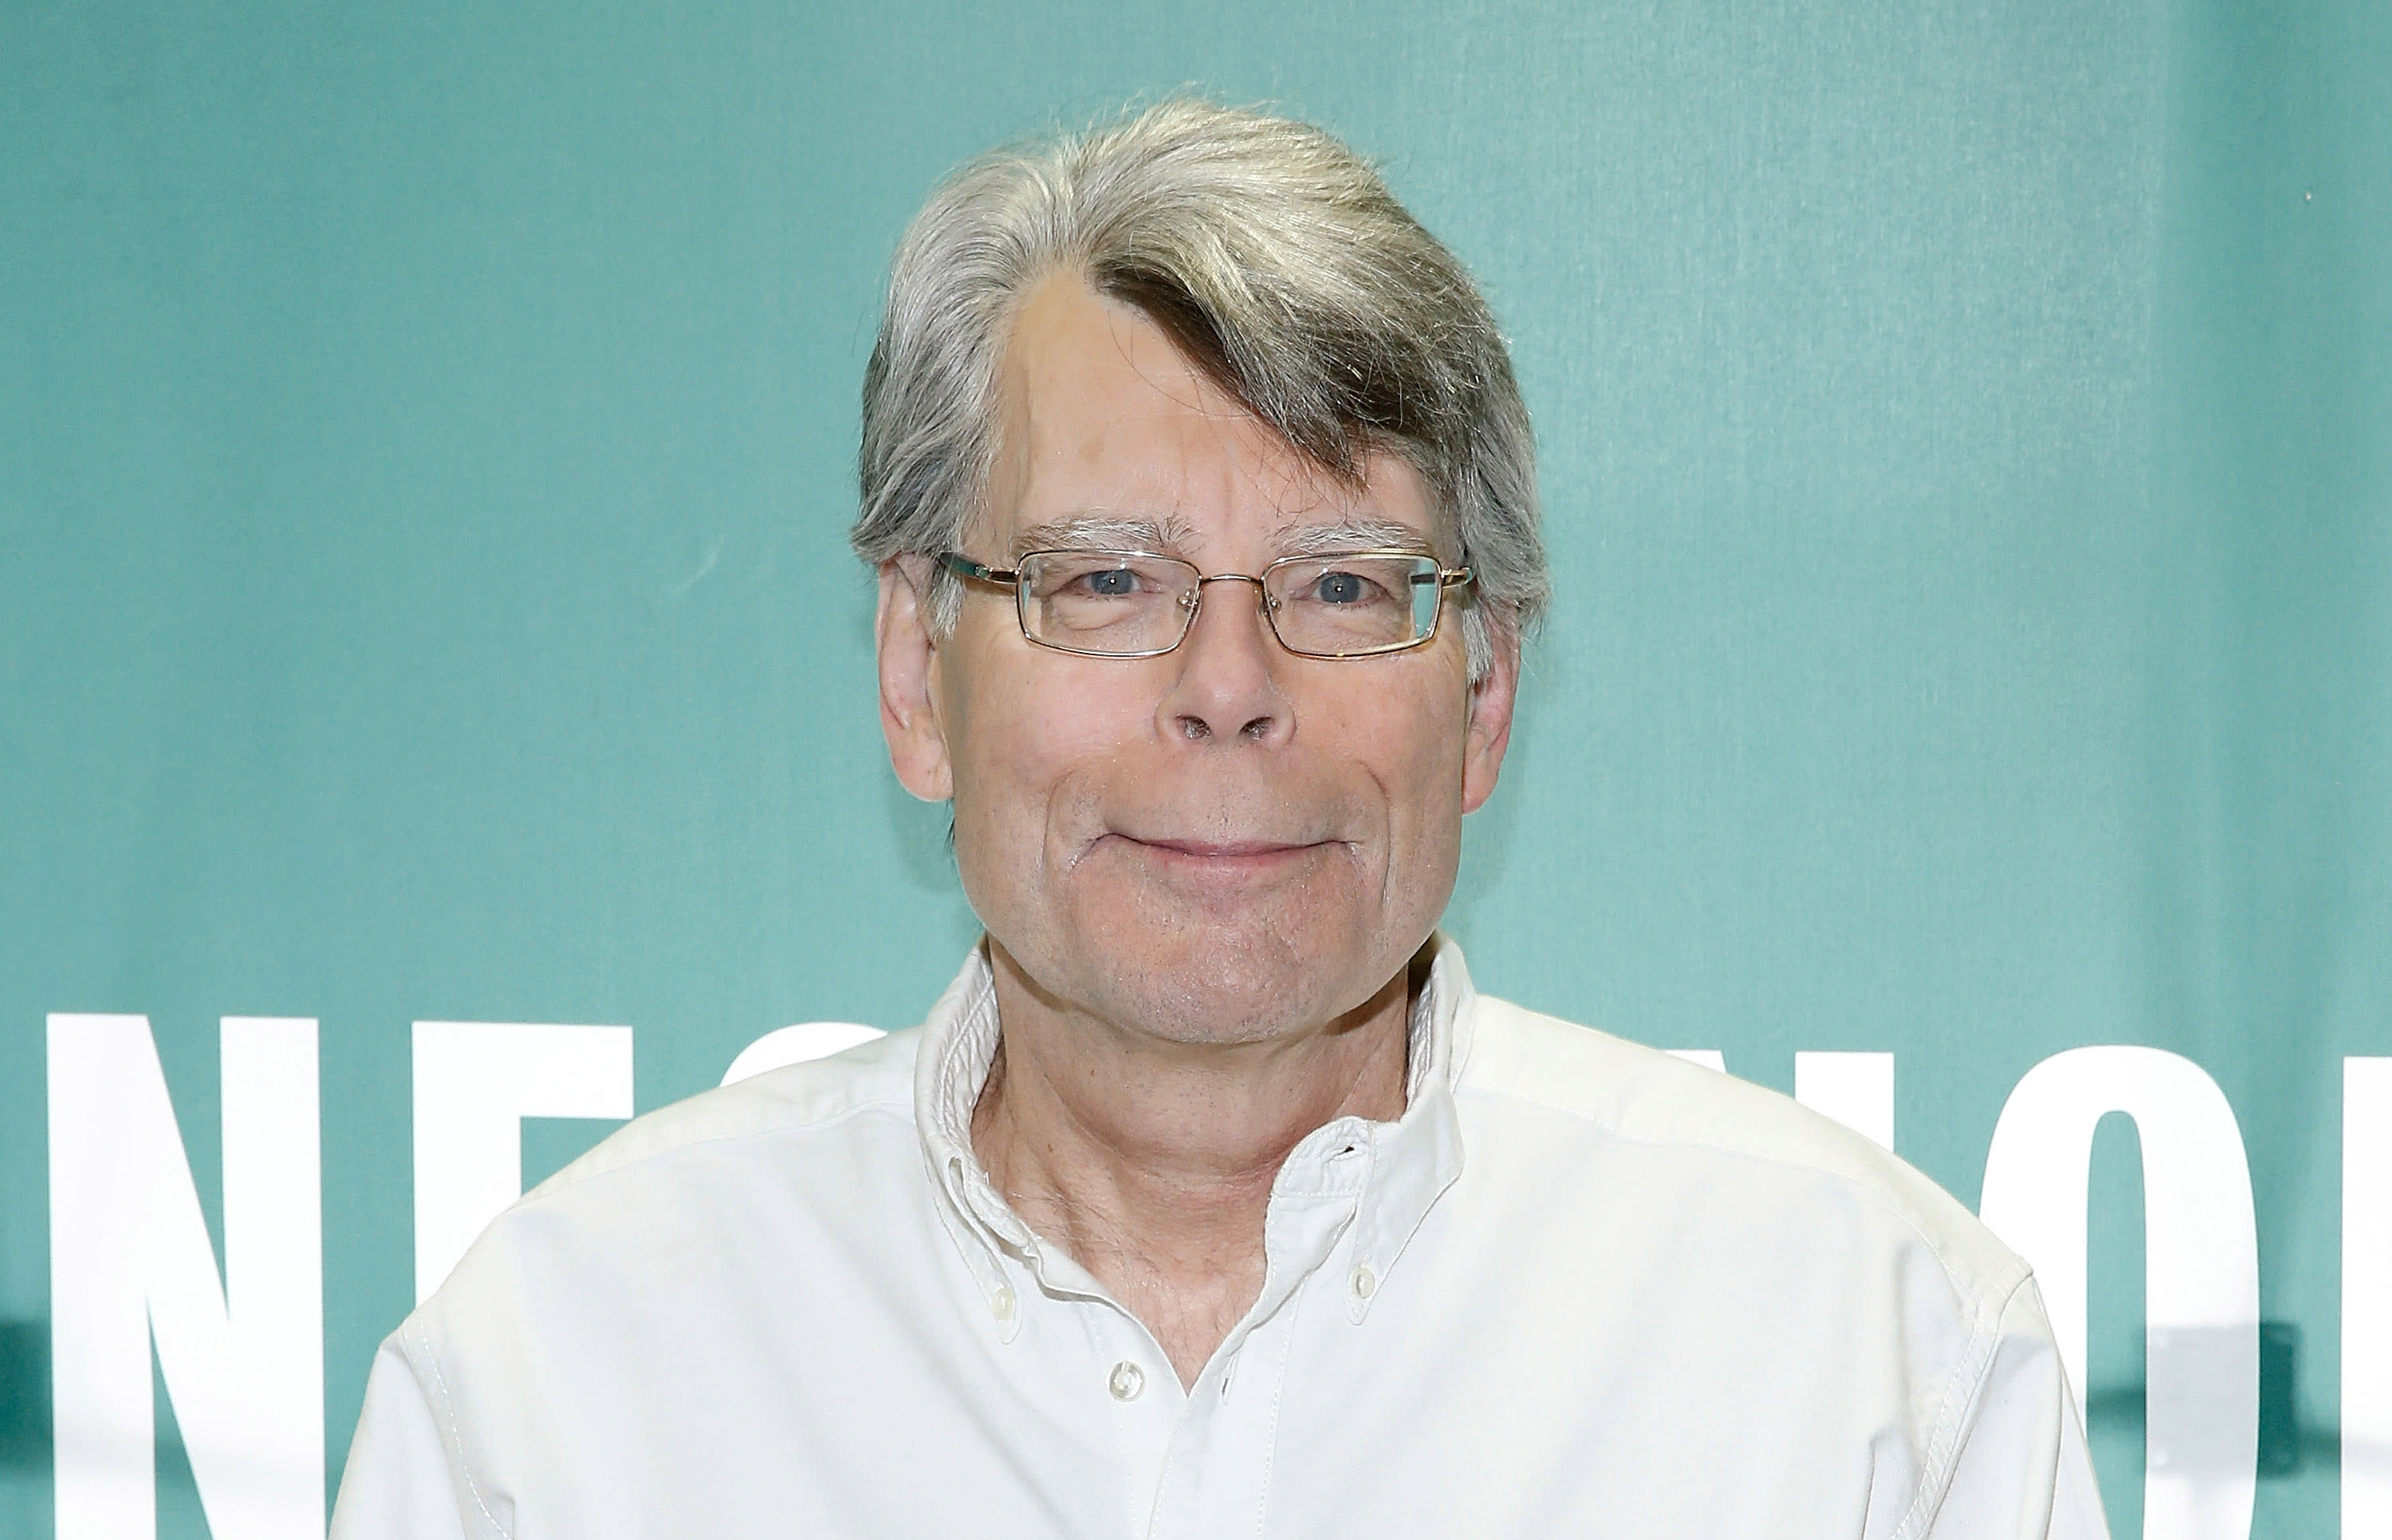 Stephen King's election comment gains momentum